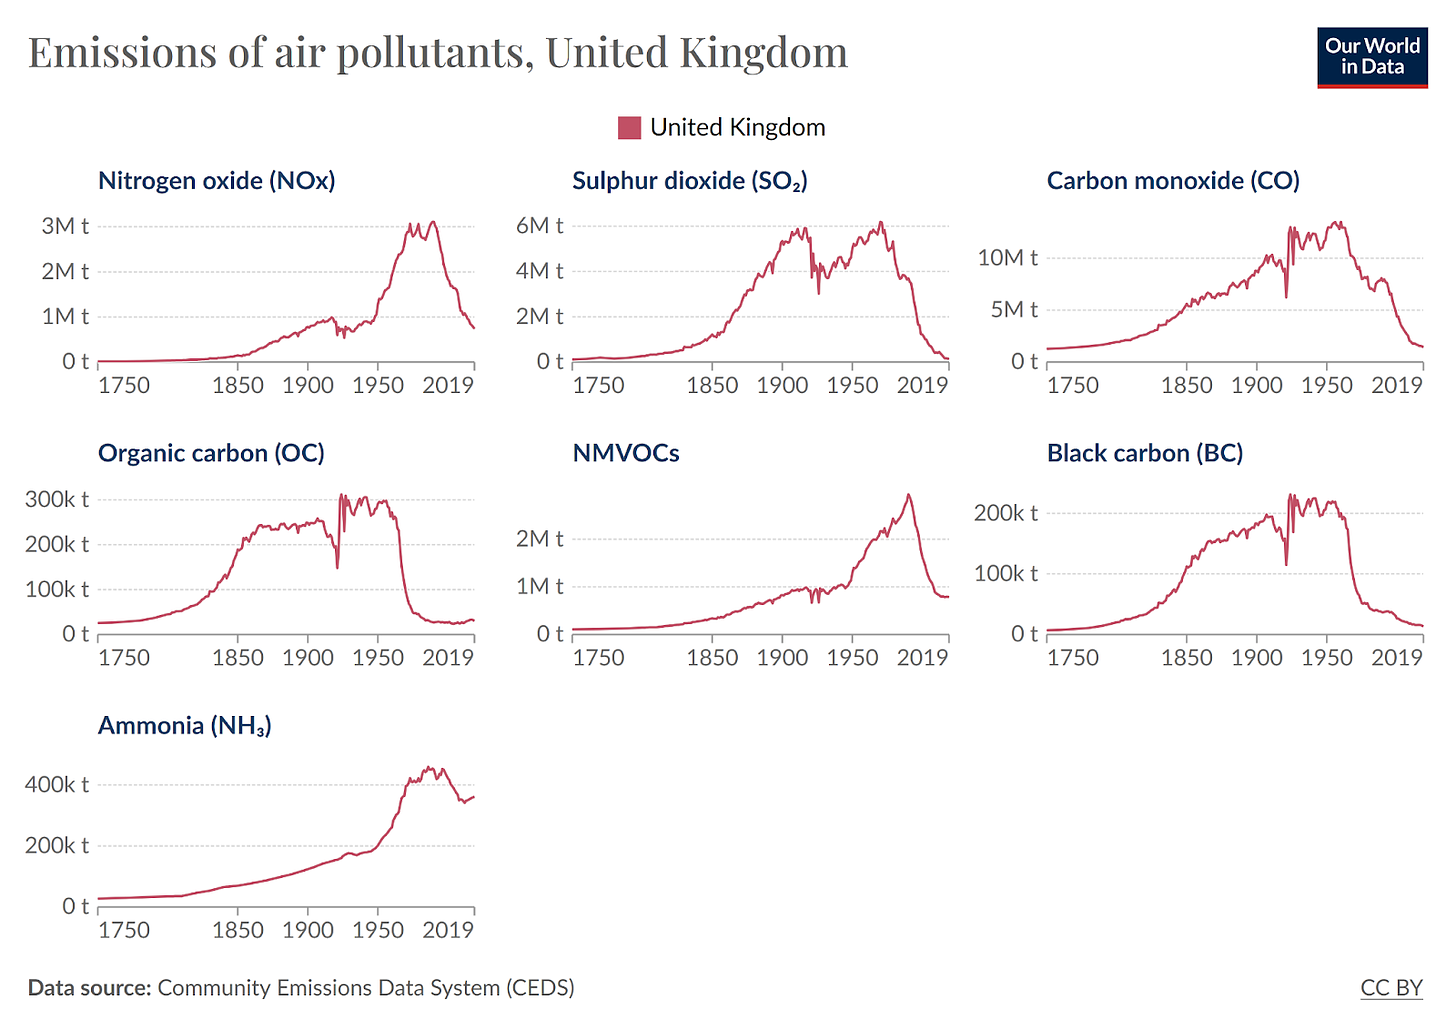 A chart showing the emissions of several pollutants over time in the UK.